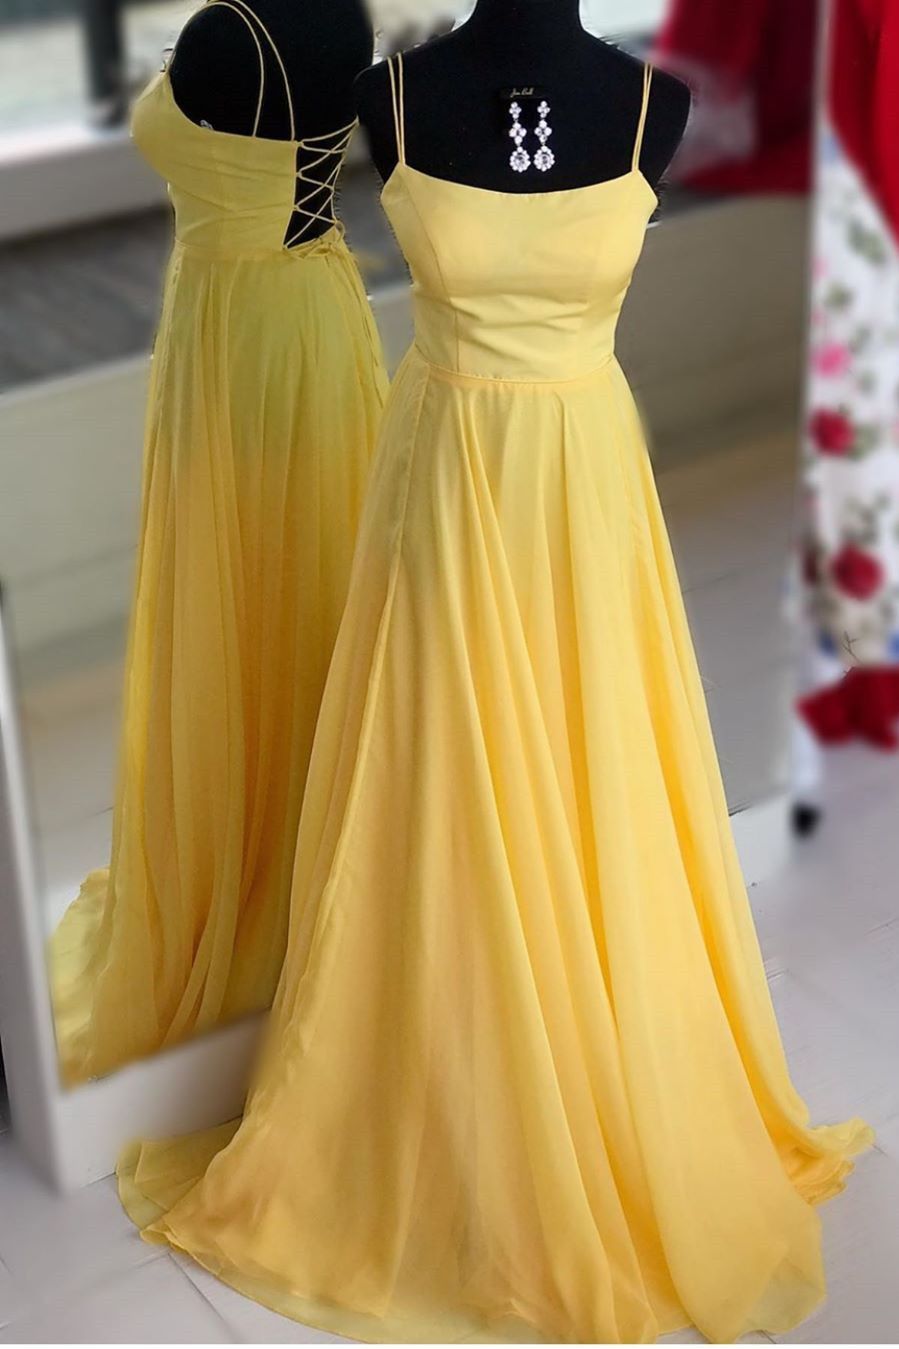 Scoop Neckline Long Yellow Chiffon Prom Dress With Tie Back